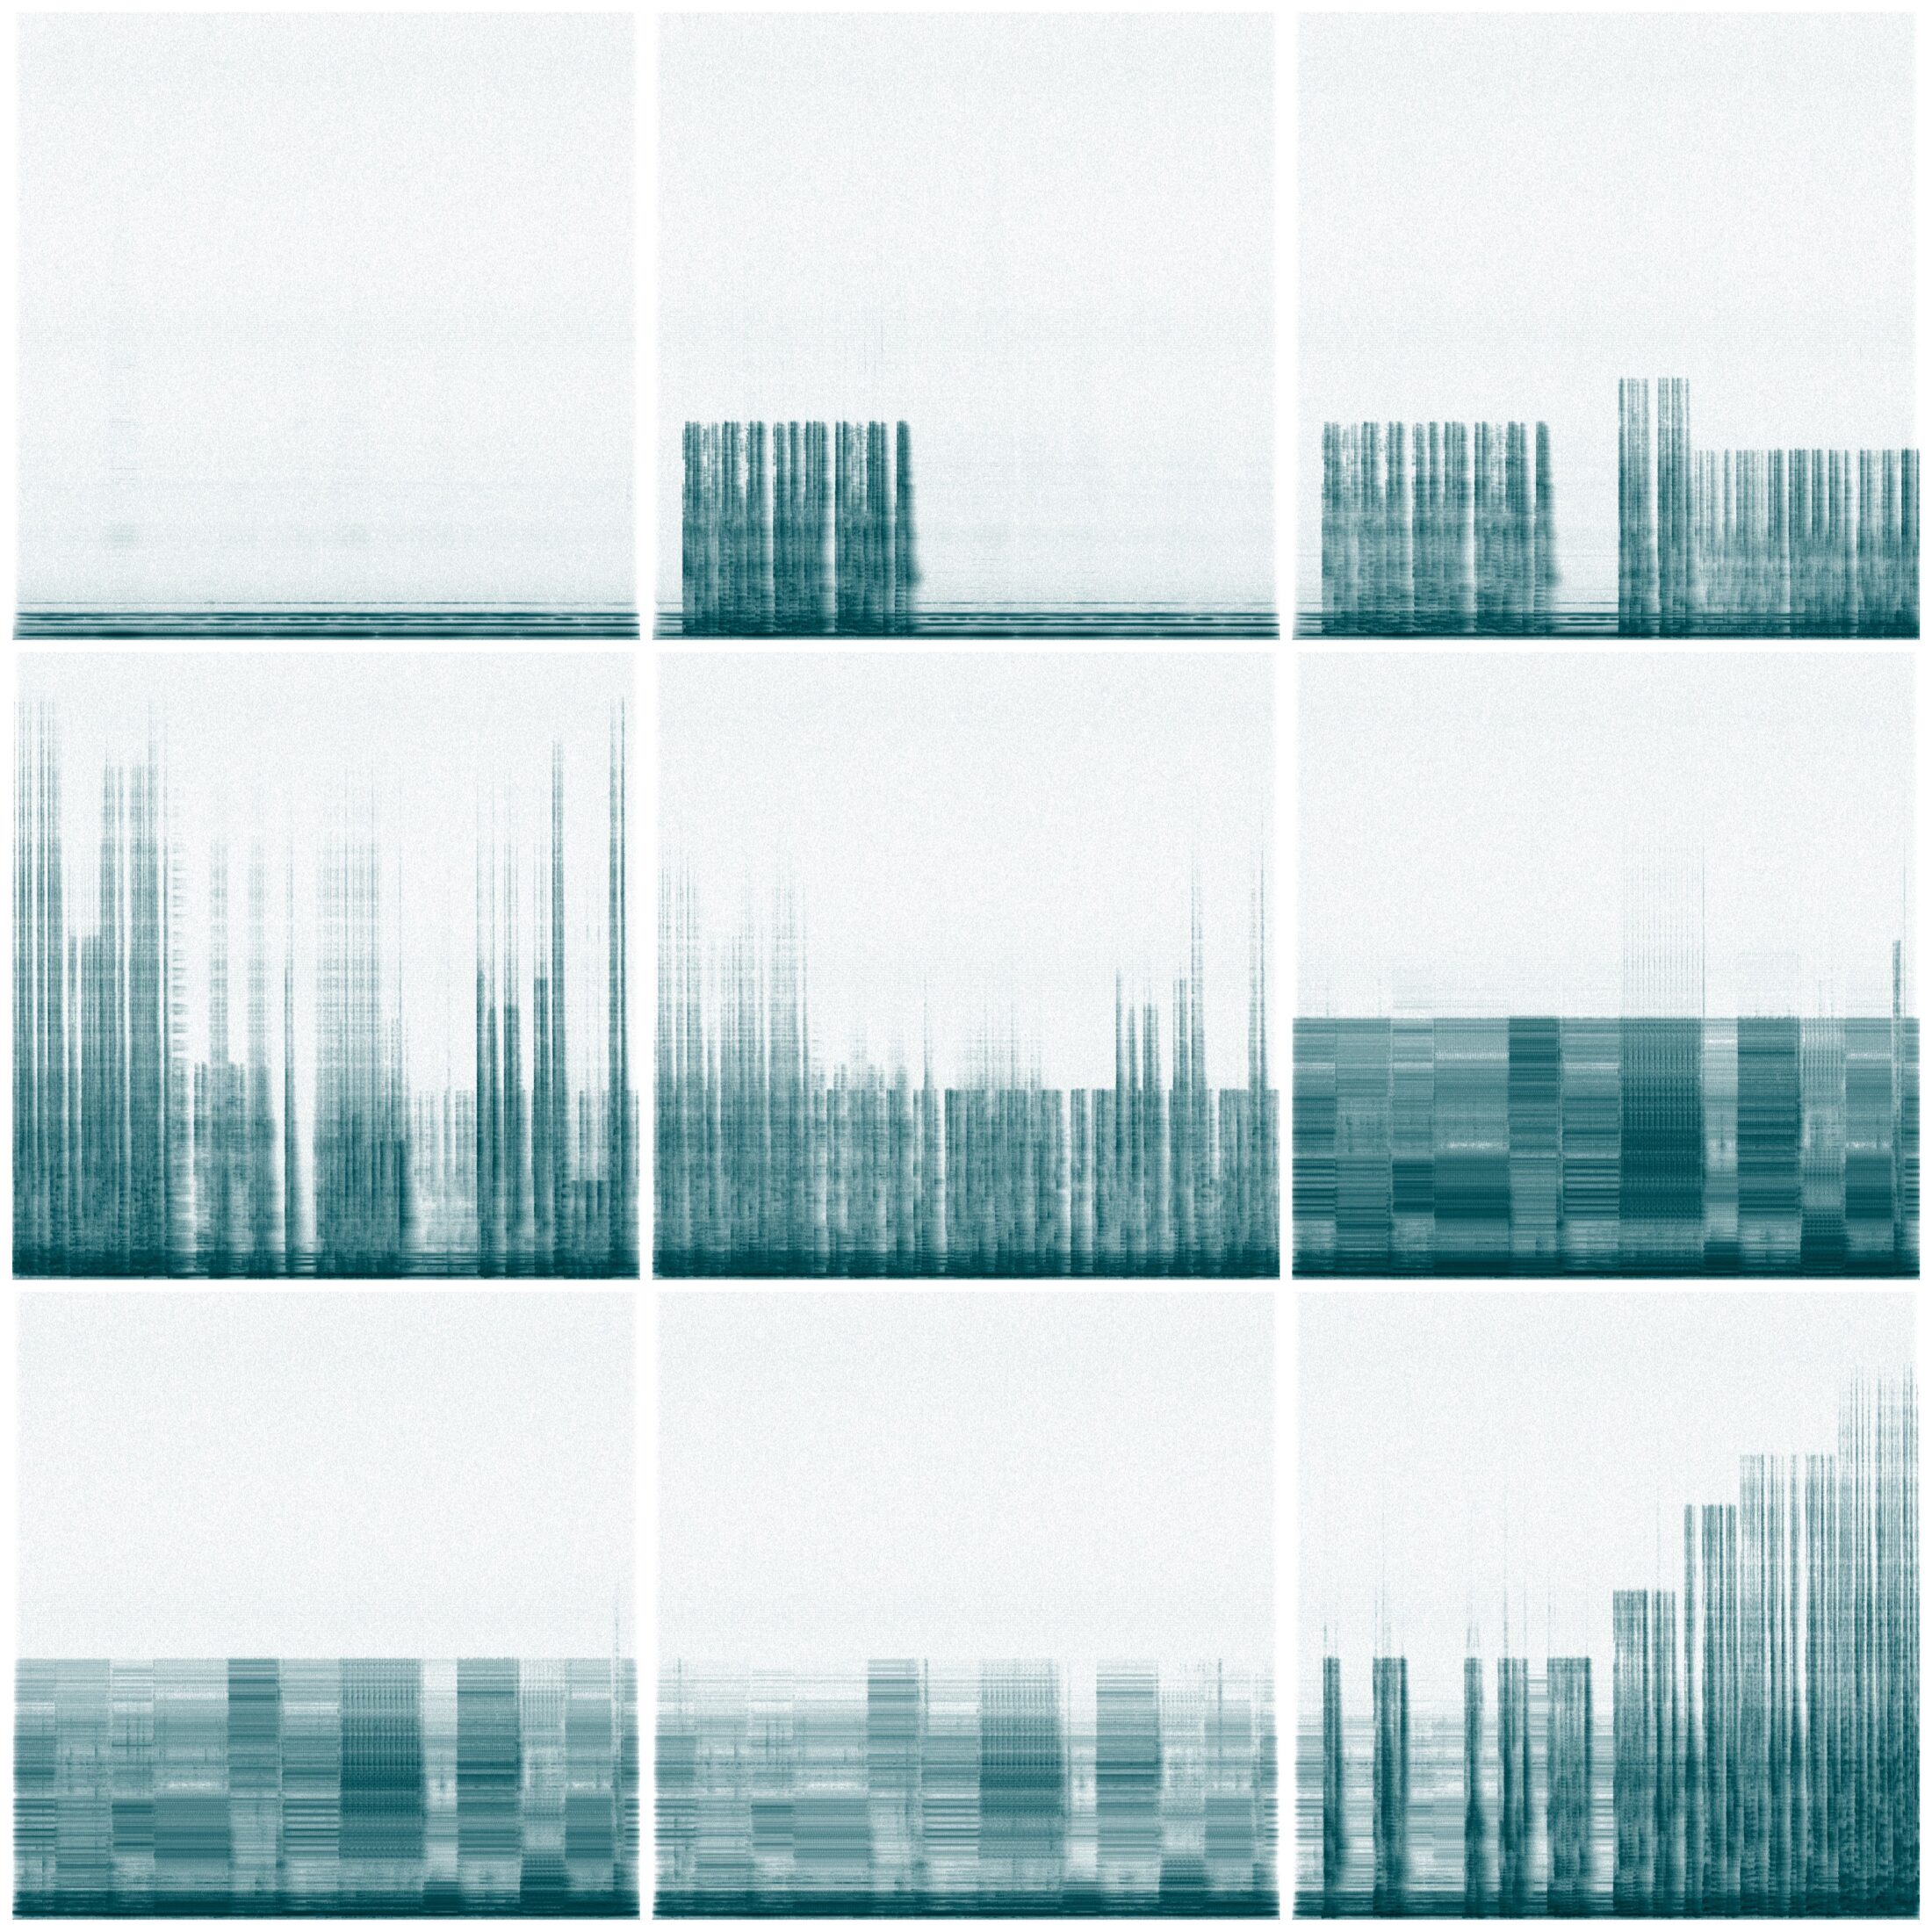 Remote Voices — grid of nine spectrograms